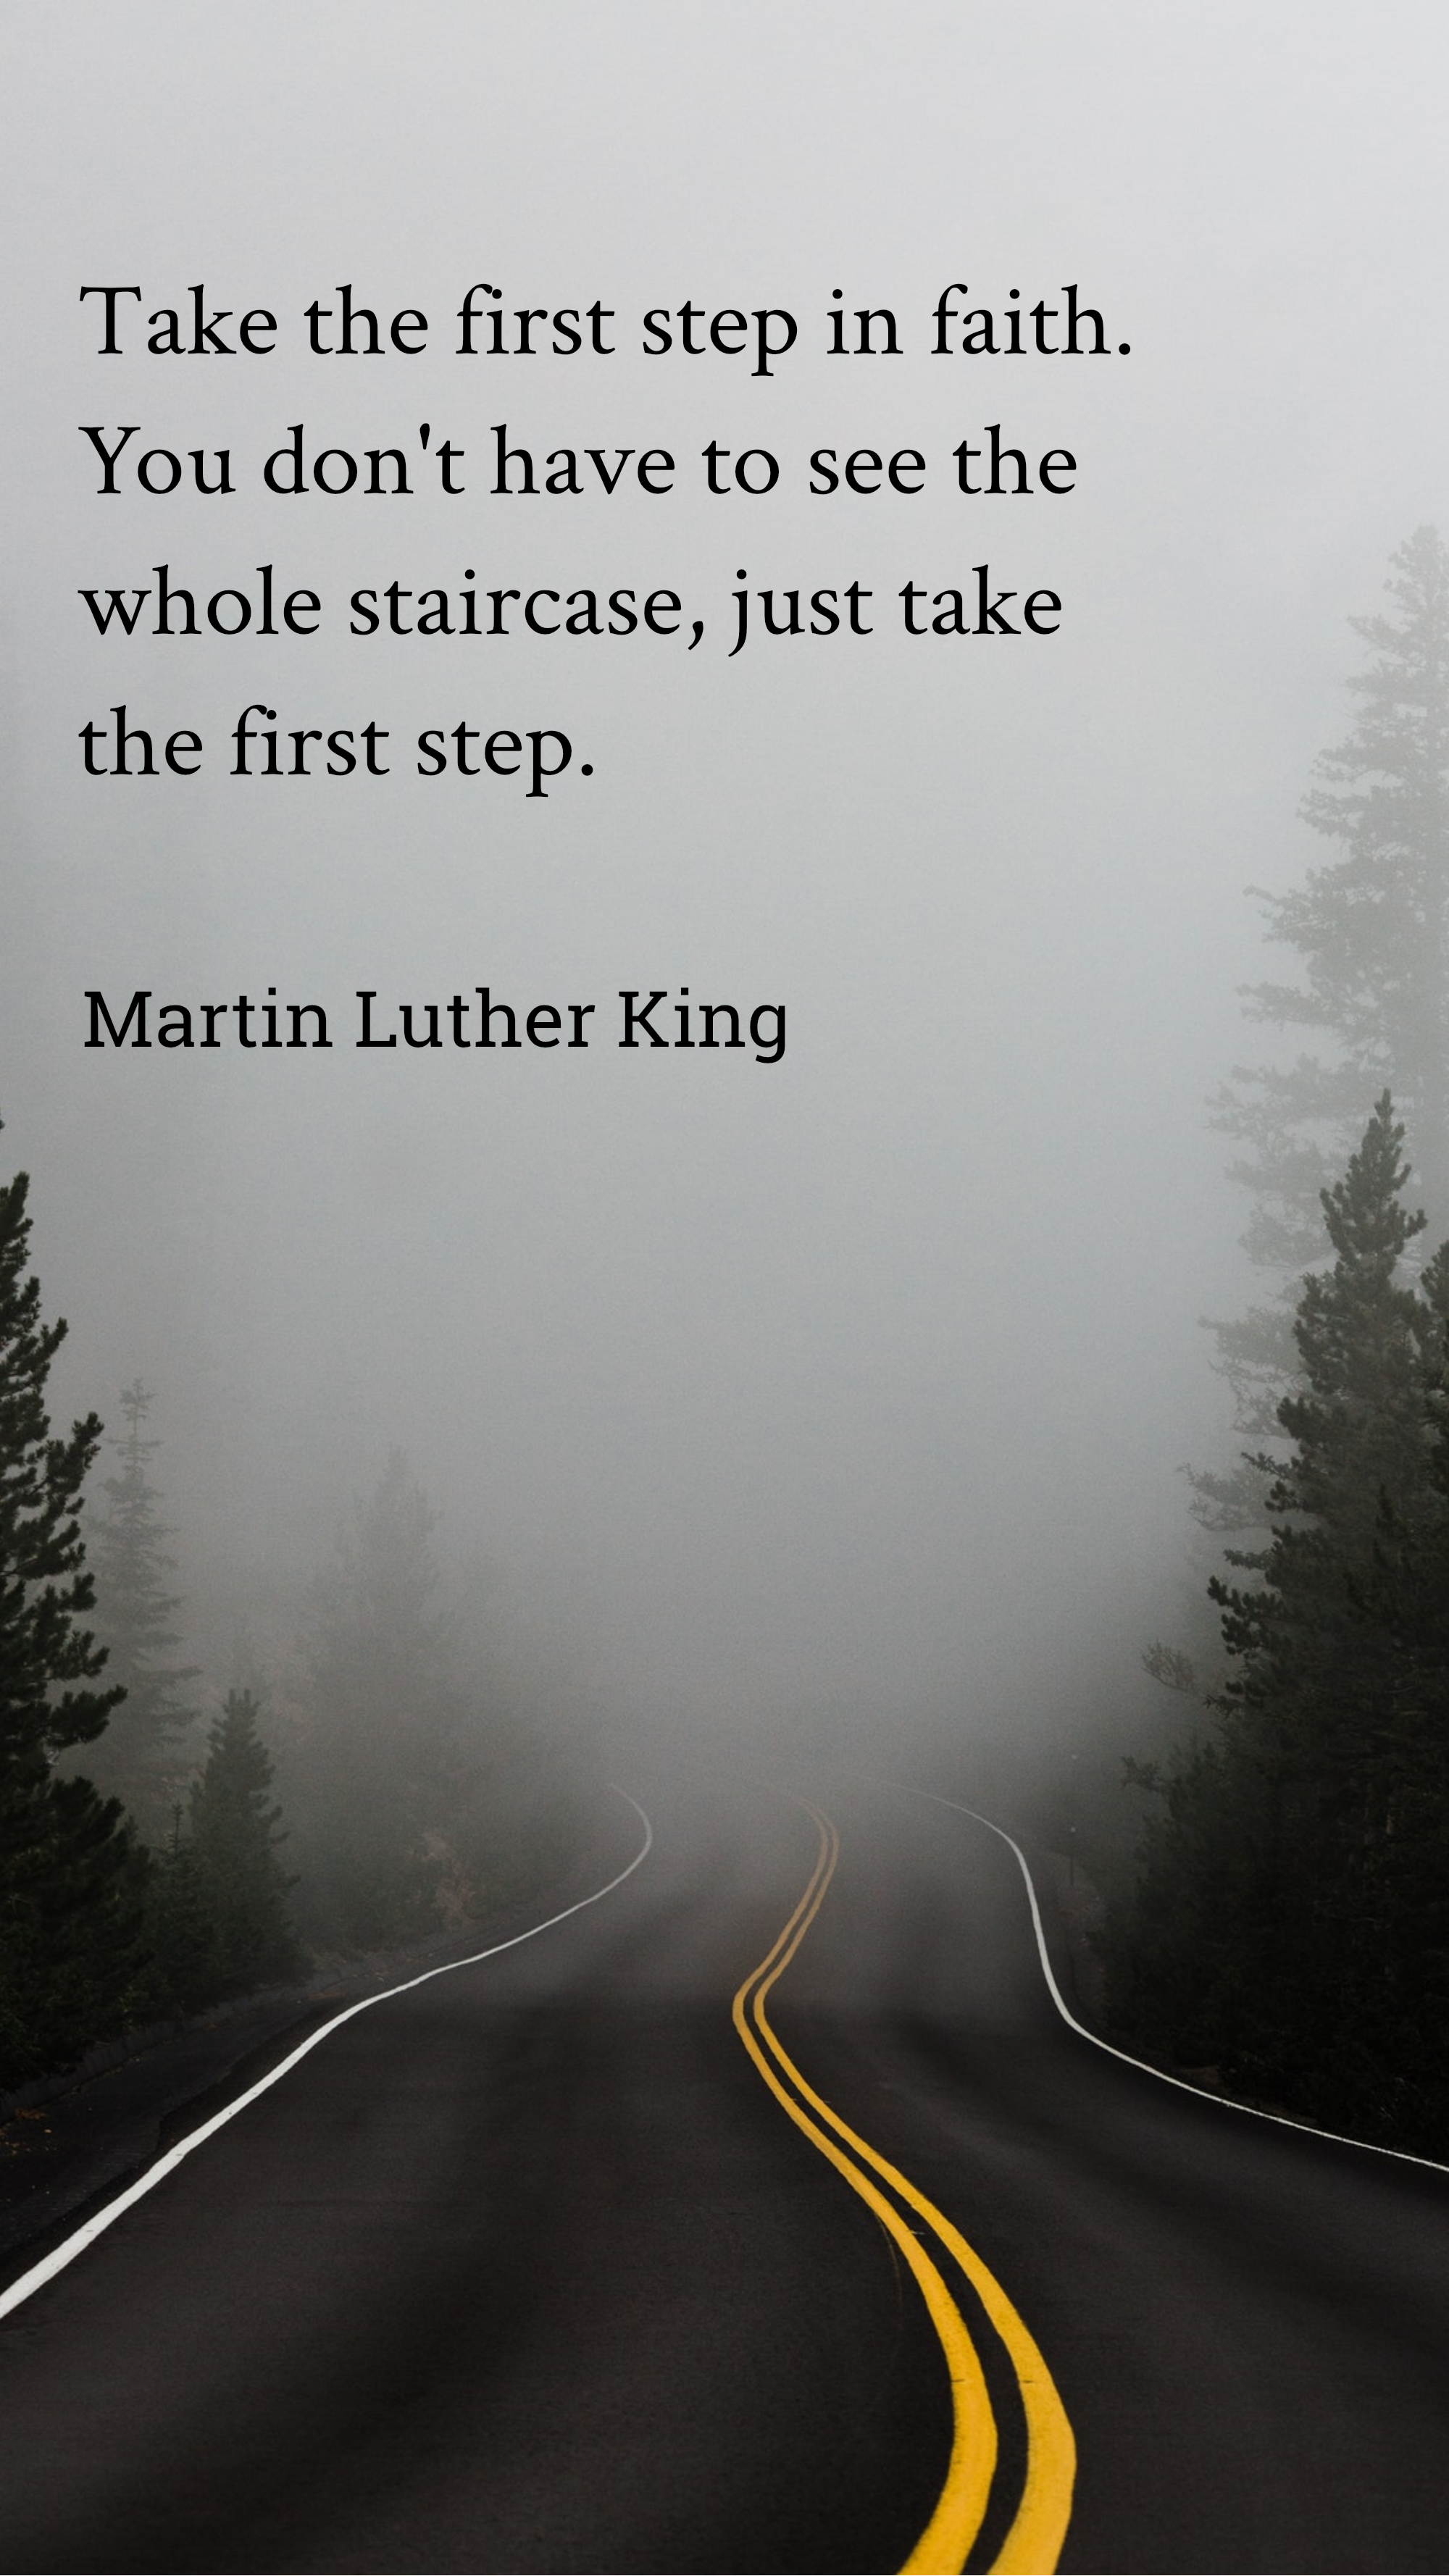 Høj eksponering Onset Mor MLK QUOTE: Take the first step in faith - Martin Luther King Quote